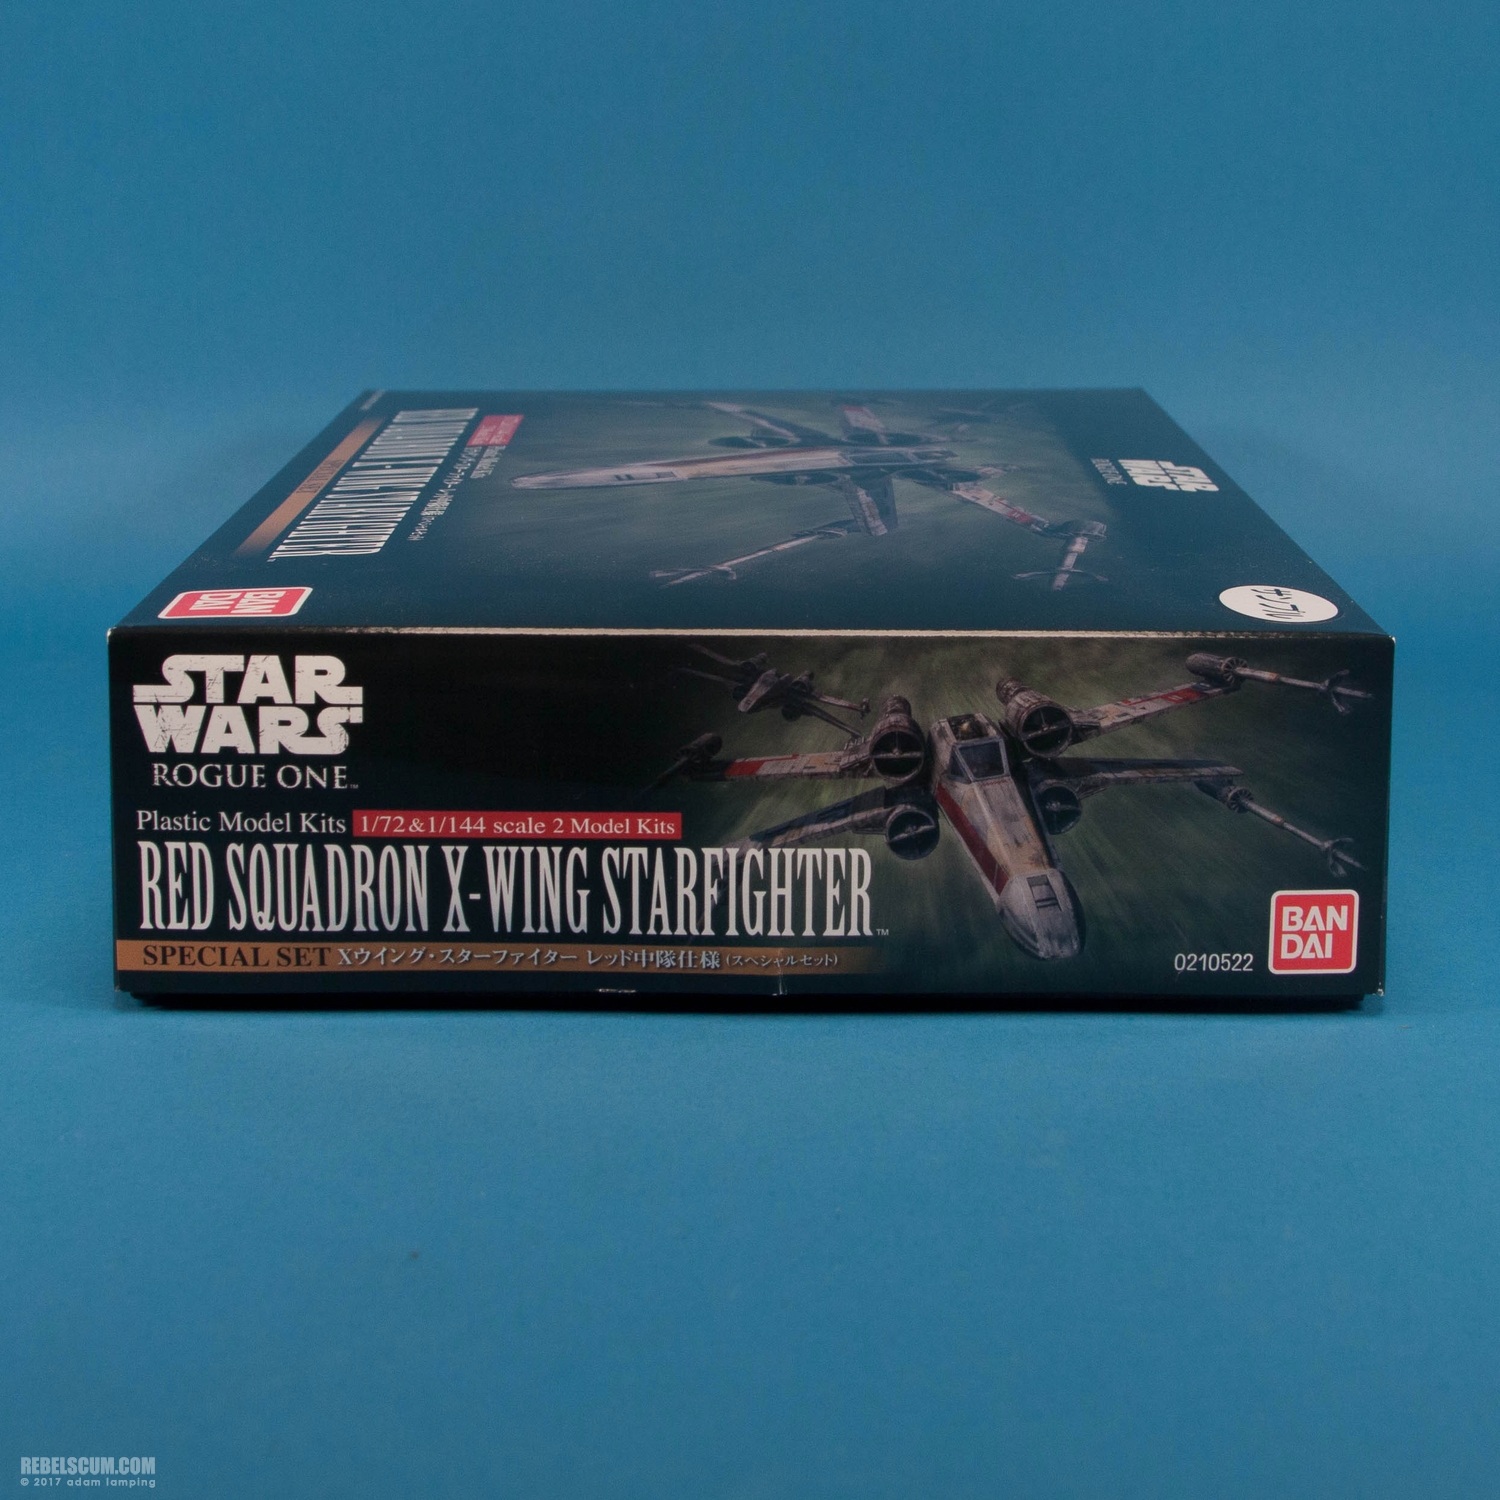 bandai-red-squadron-x-wing-starfighter-scale-model-kit-038.jpg